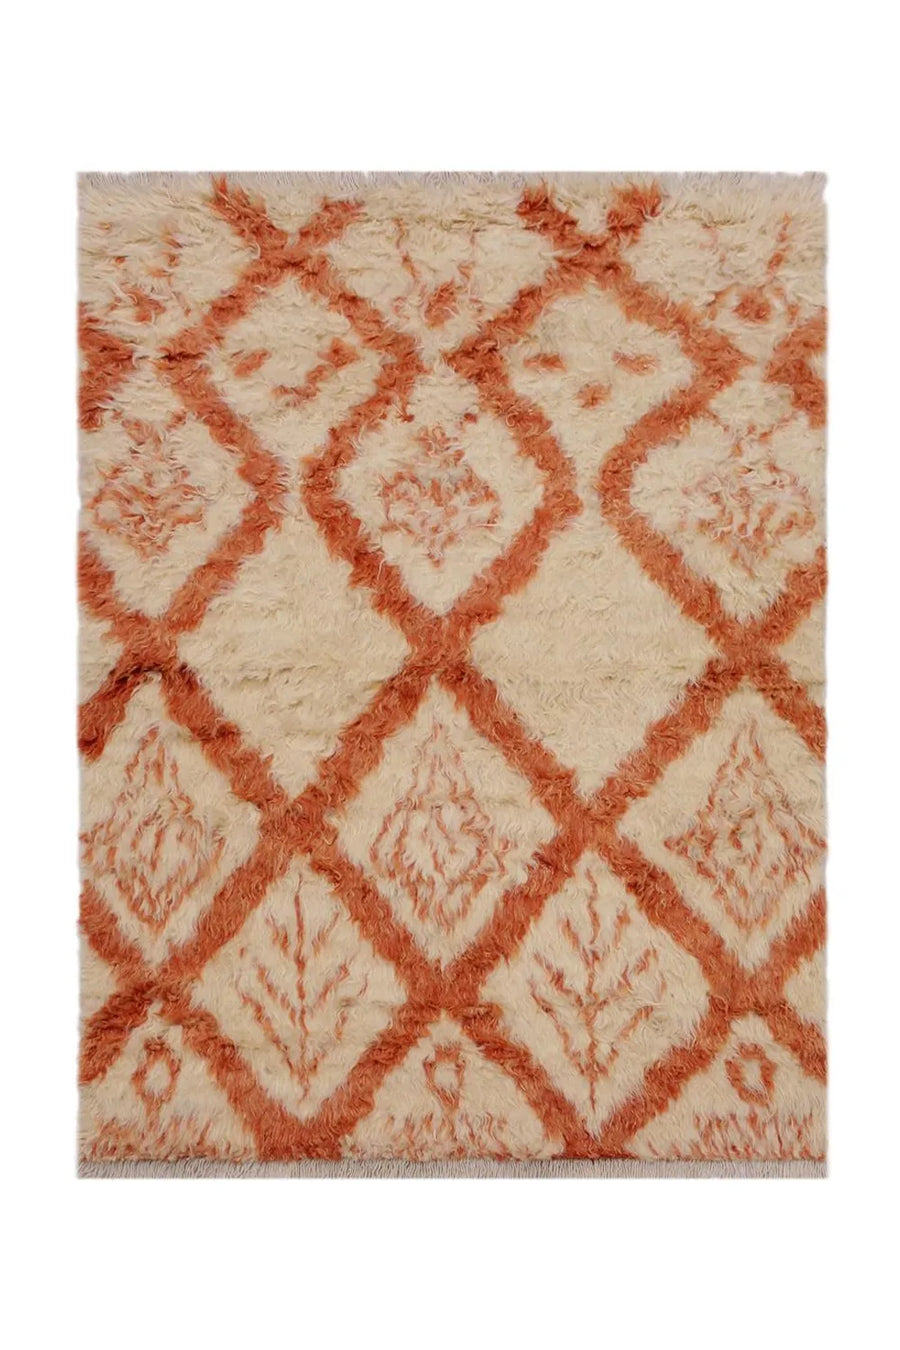 handknotted white shag rug with natural rust geometric design for elegant home decor